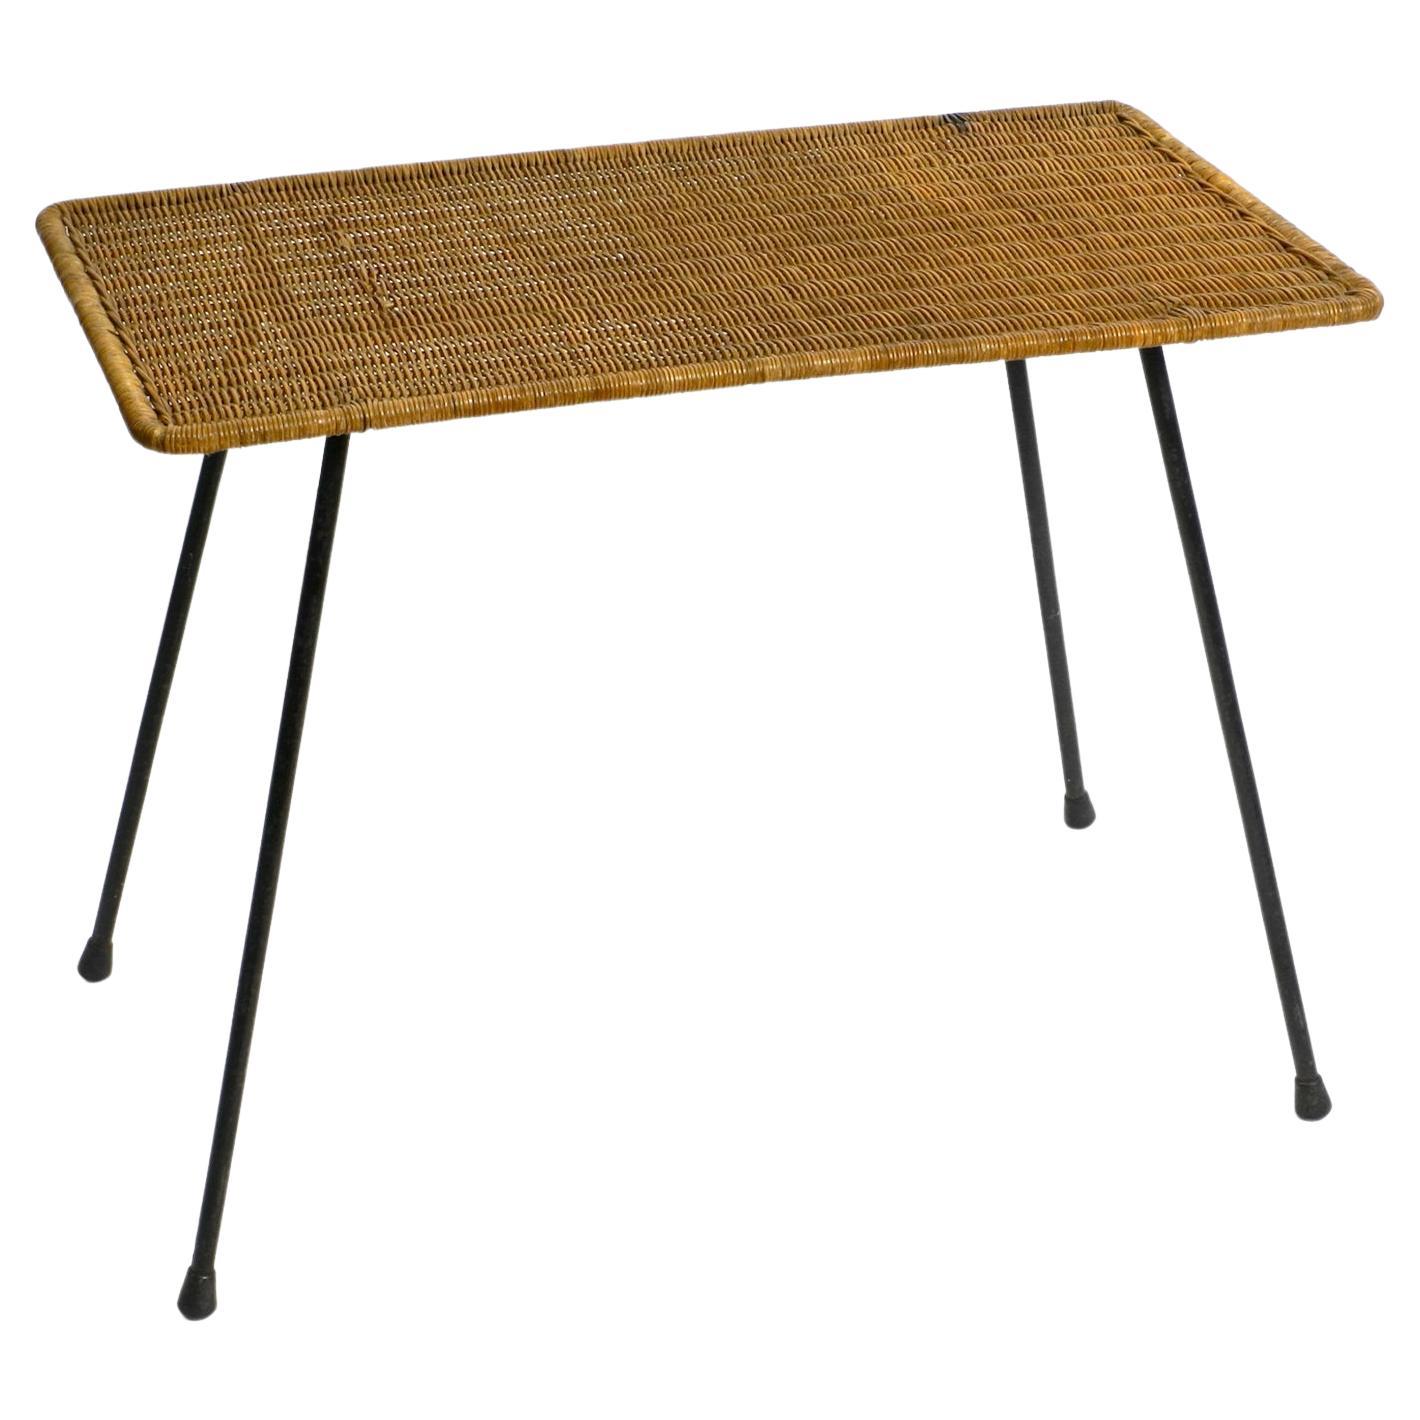 Italian Mid-Century Modern Rattan Side or Coffee Table with a Heavy Iron Frame